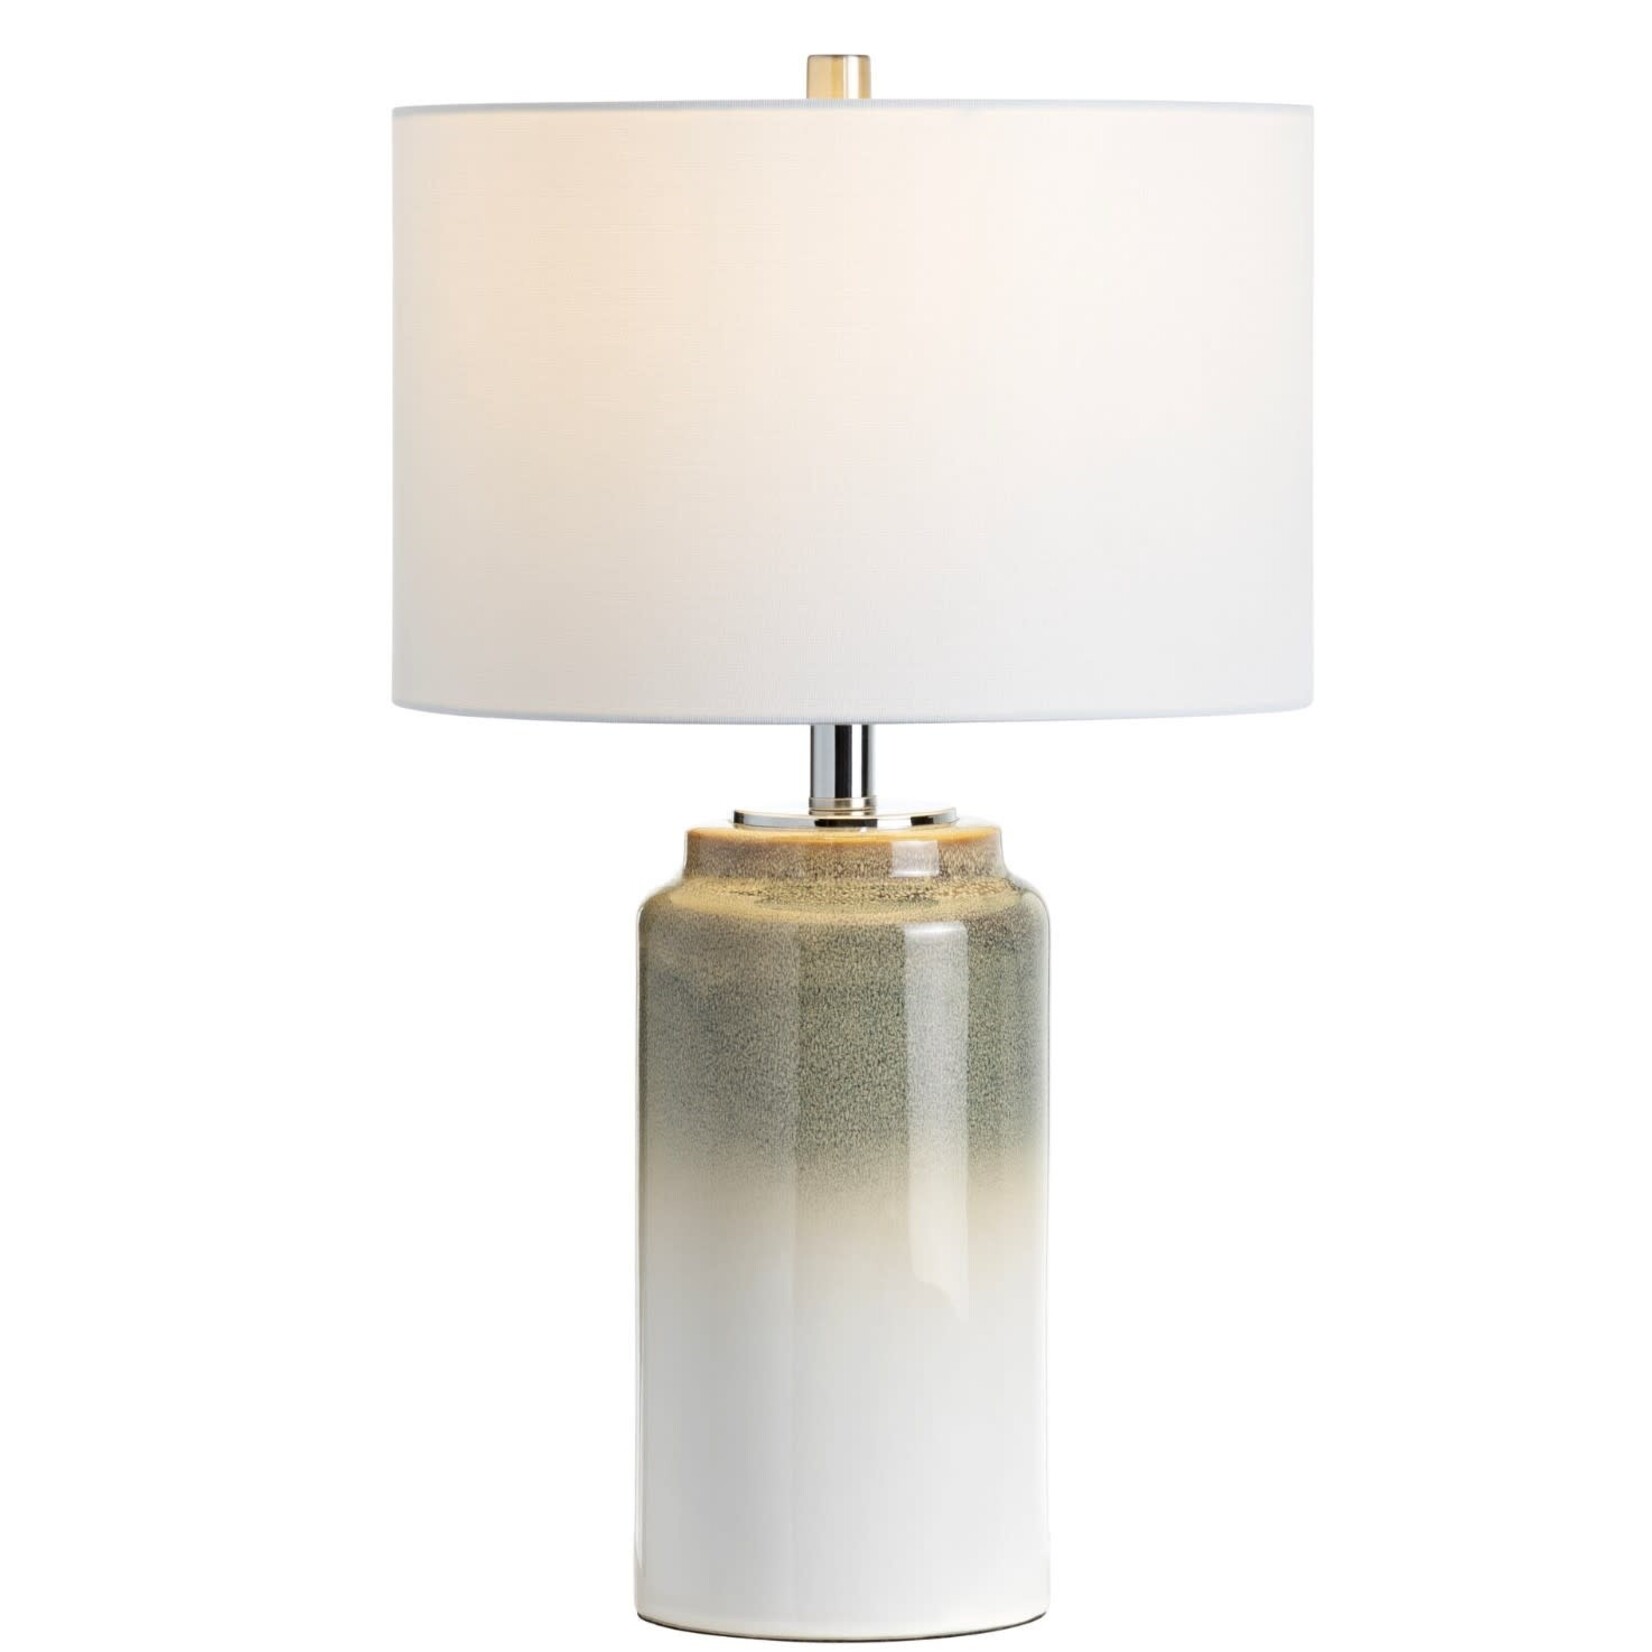 Mickler & Co. Anna Table Lamp